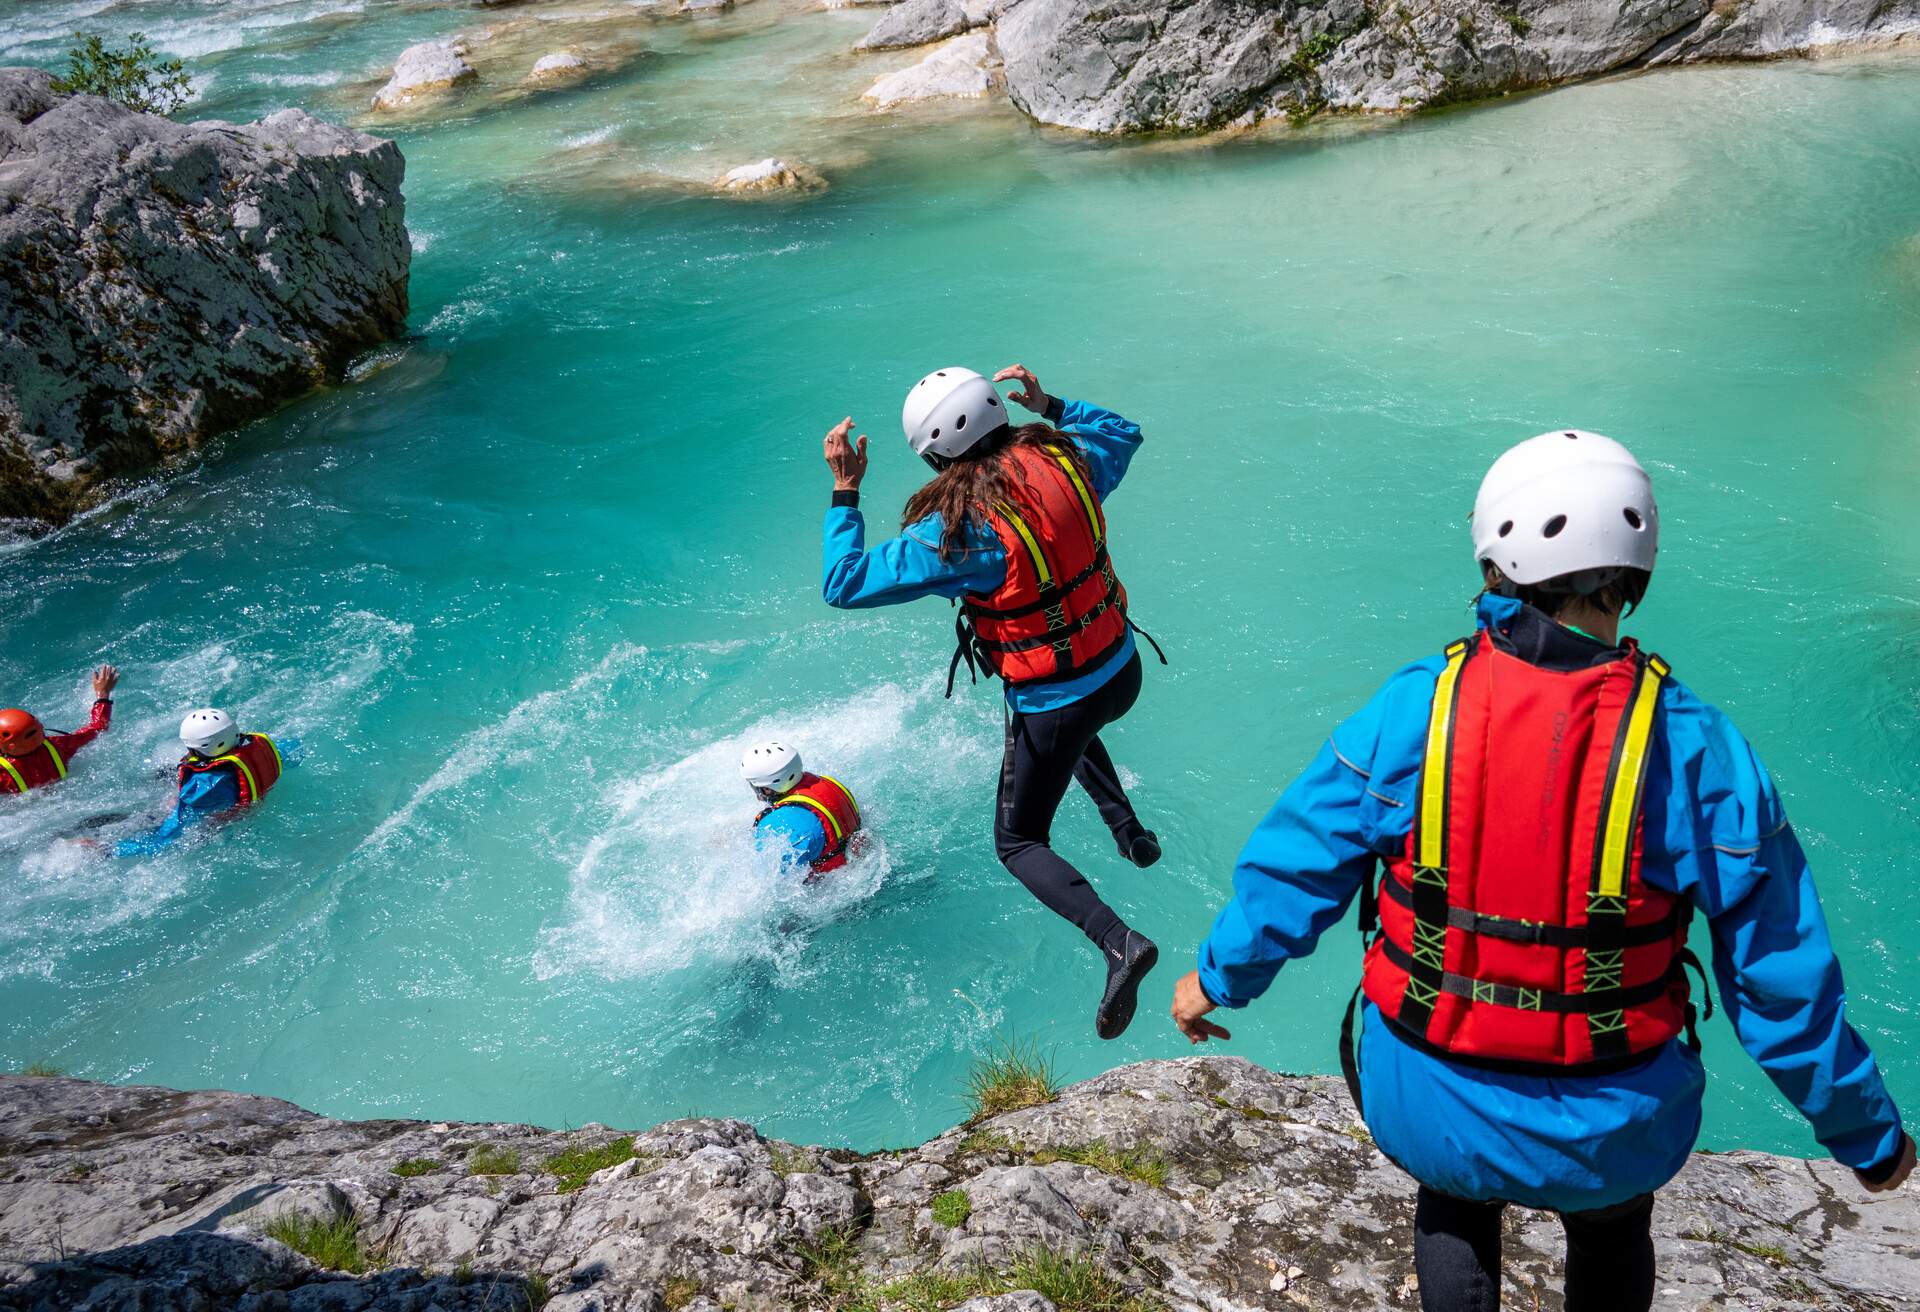 SLOVENIA_SOCA_RIVER_PEOPLE_JUMPING_INTO_WATER_CANYONING